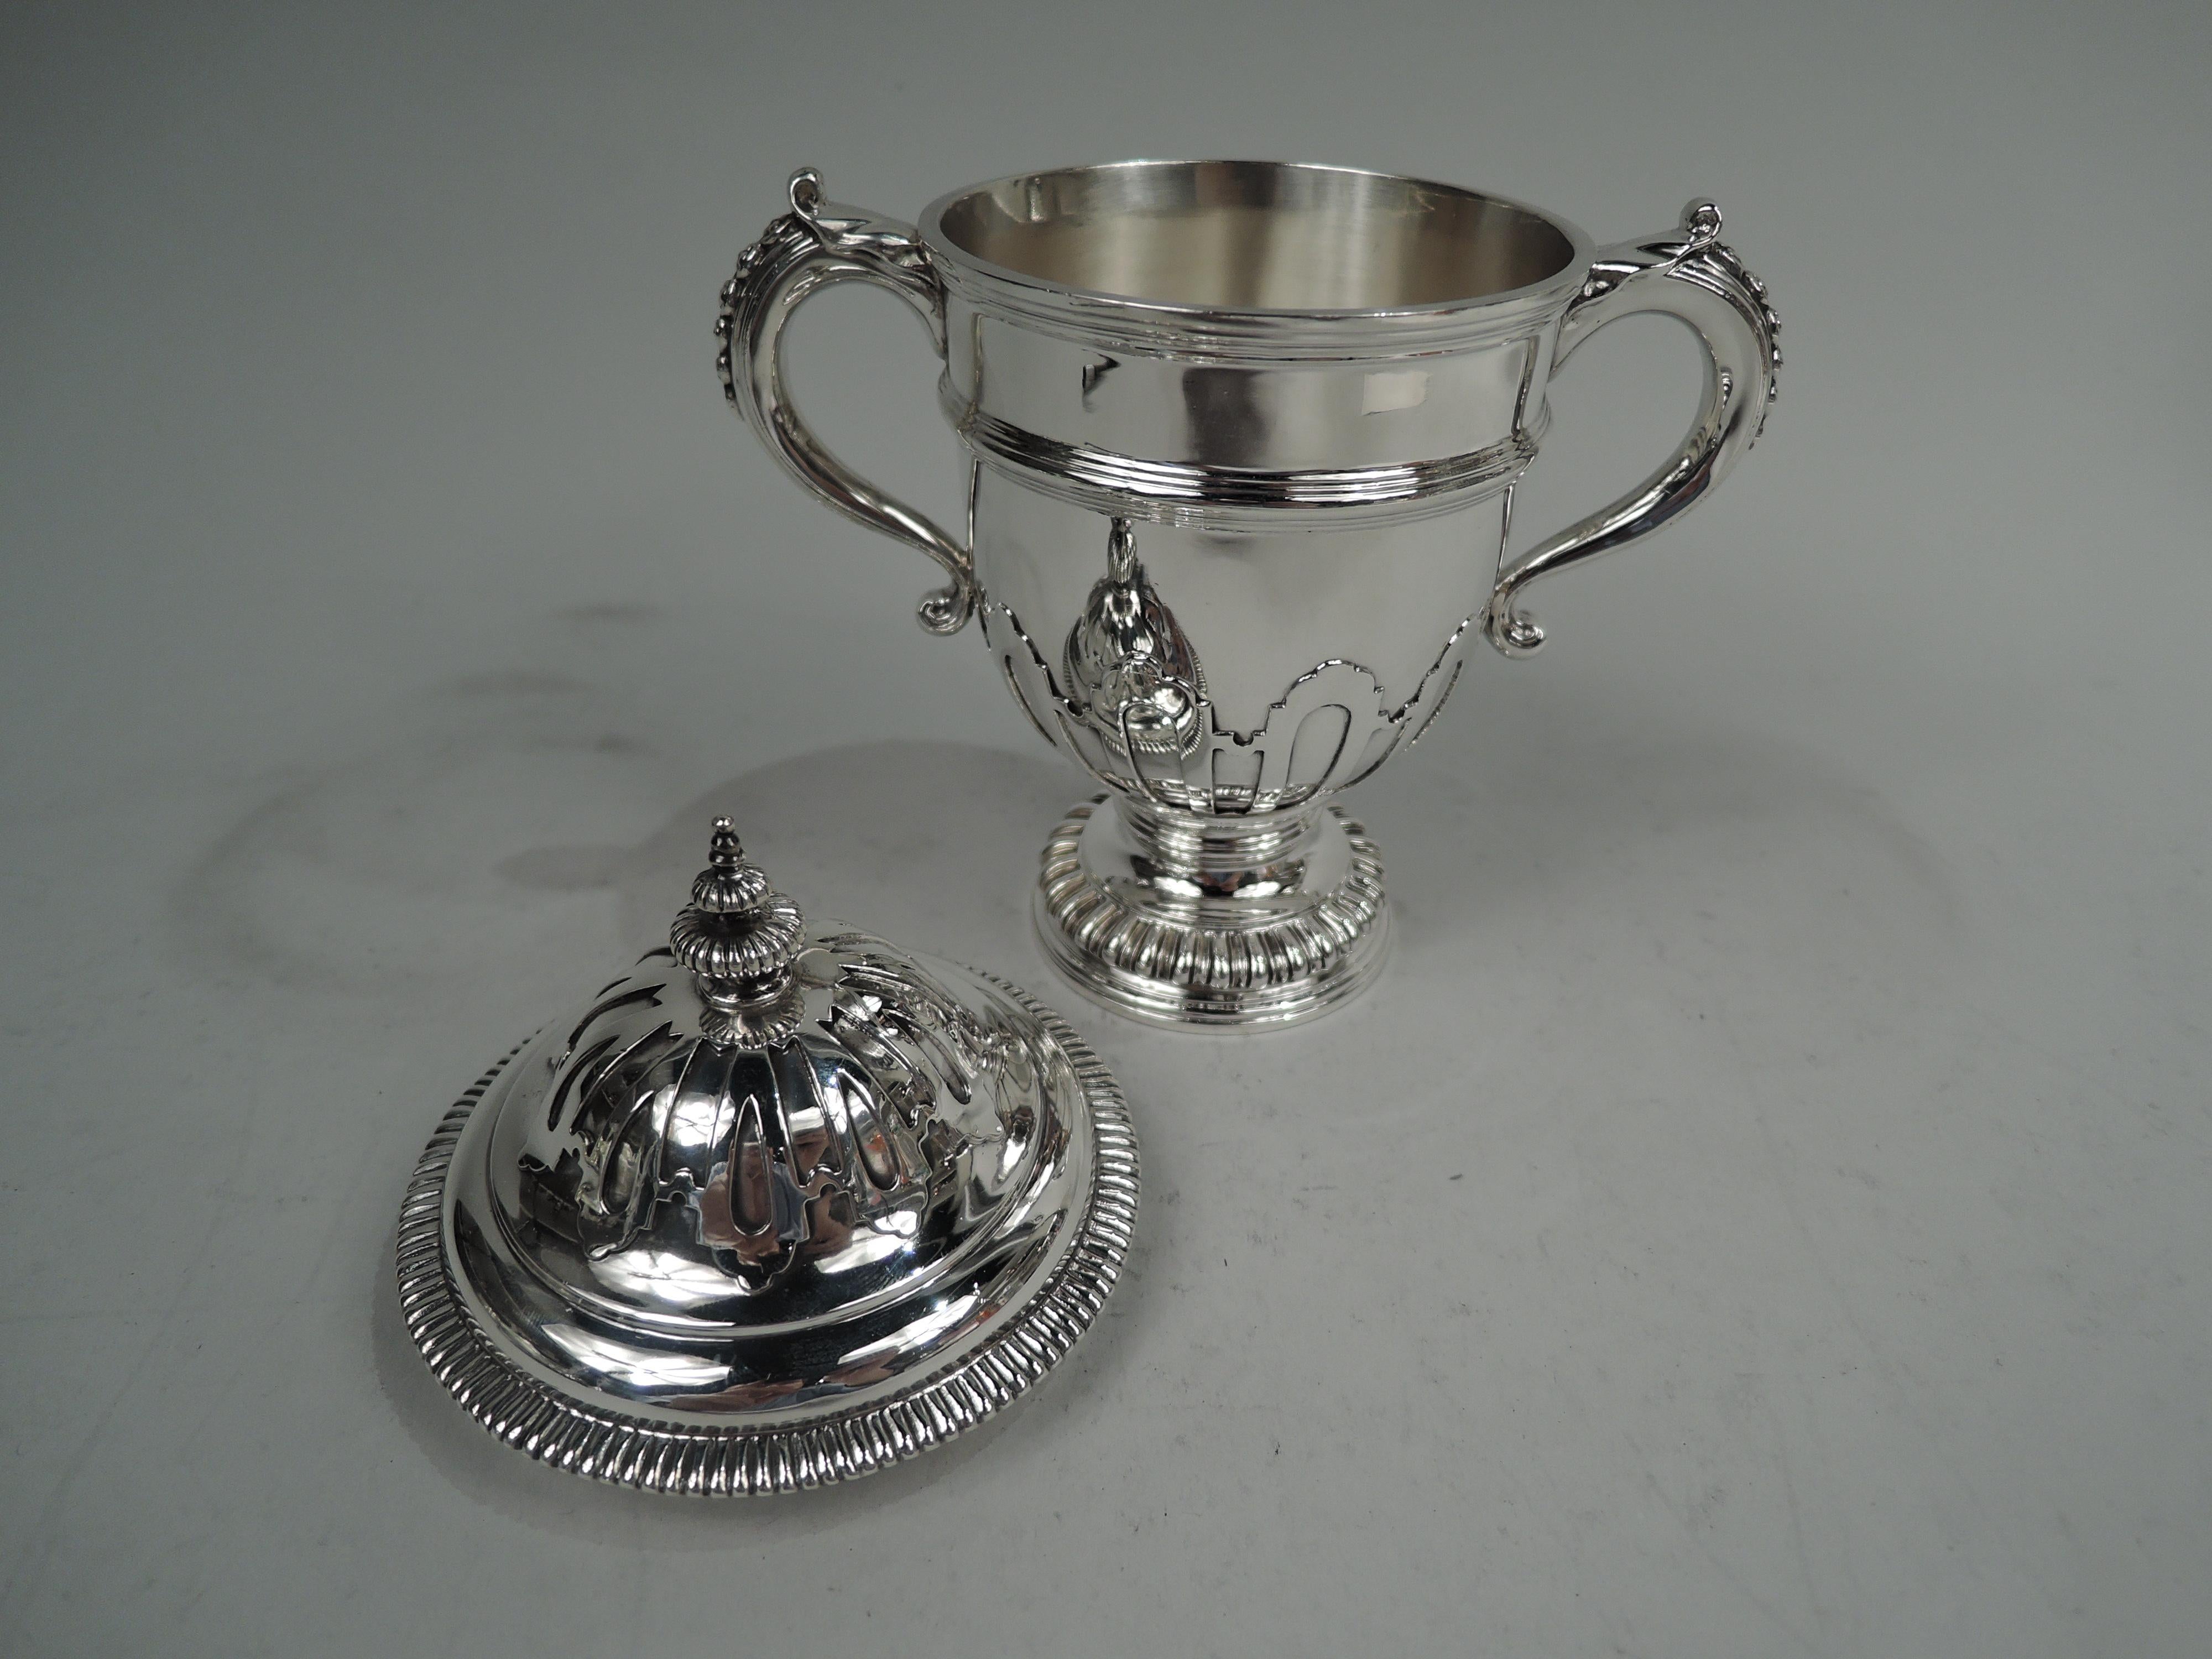 George V covered urn. Made by Lionel Alfred Crichton in London in 1930. Girdled urn with on stepped and stepped, raised, and gadrooned foot; s-scroll side handles with leaf cap and pendant flower heads. Cover domed with gadrooned rim and and finial.